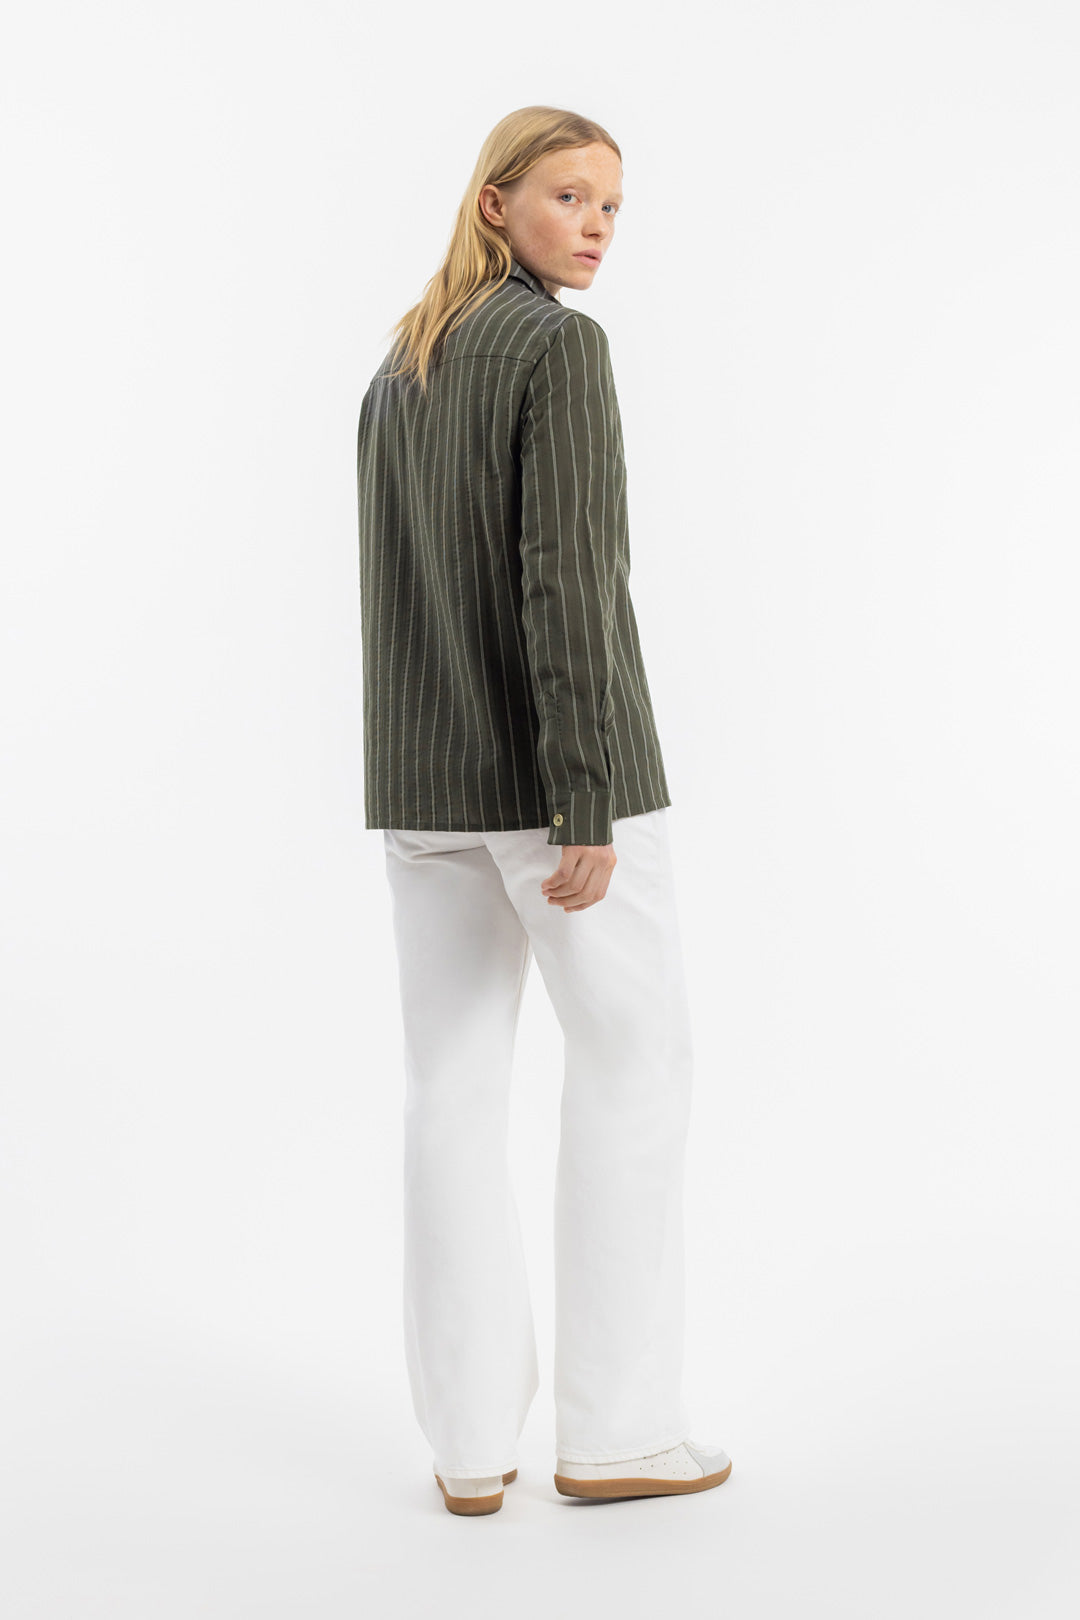 Olive, striped shirt made from 100% organic cotton from Rotholz